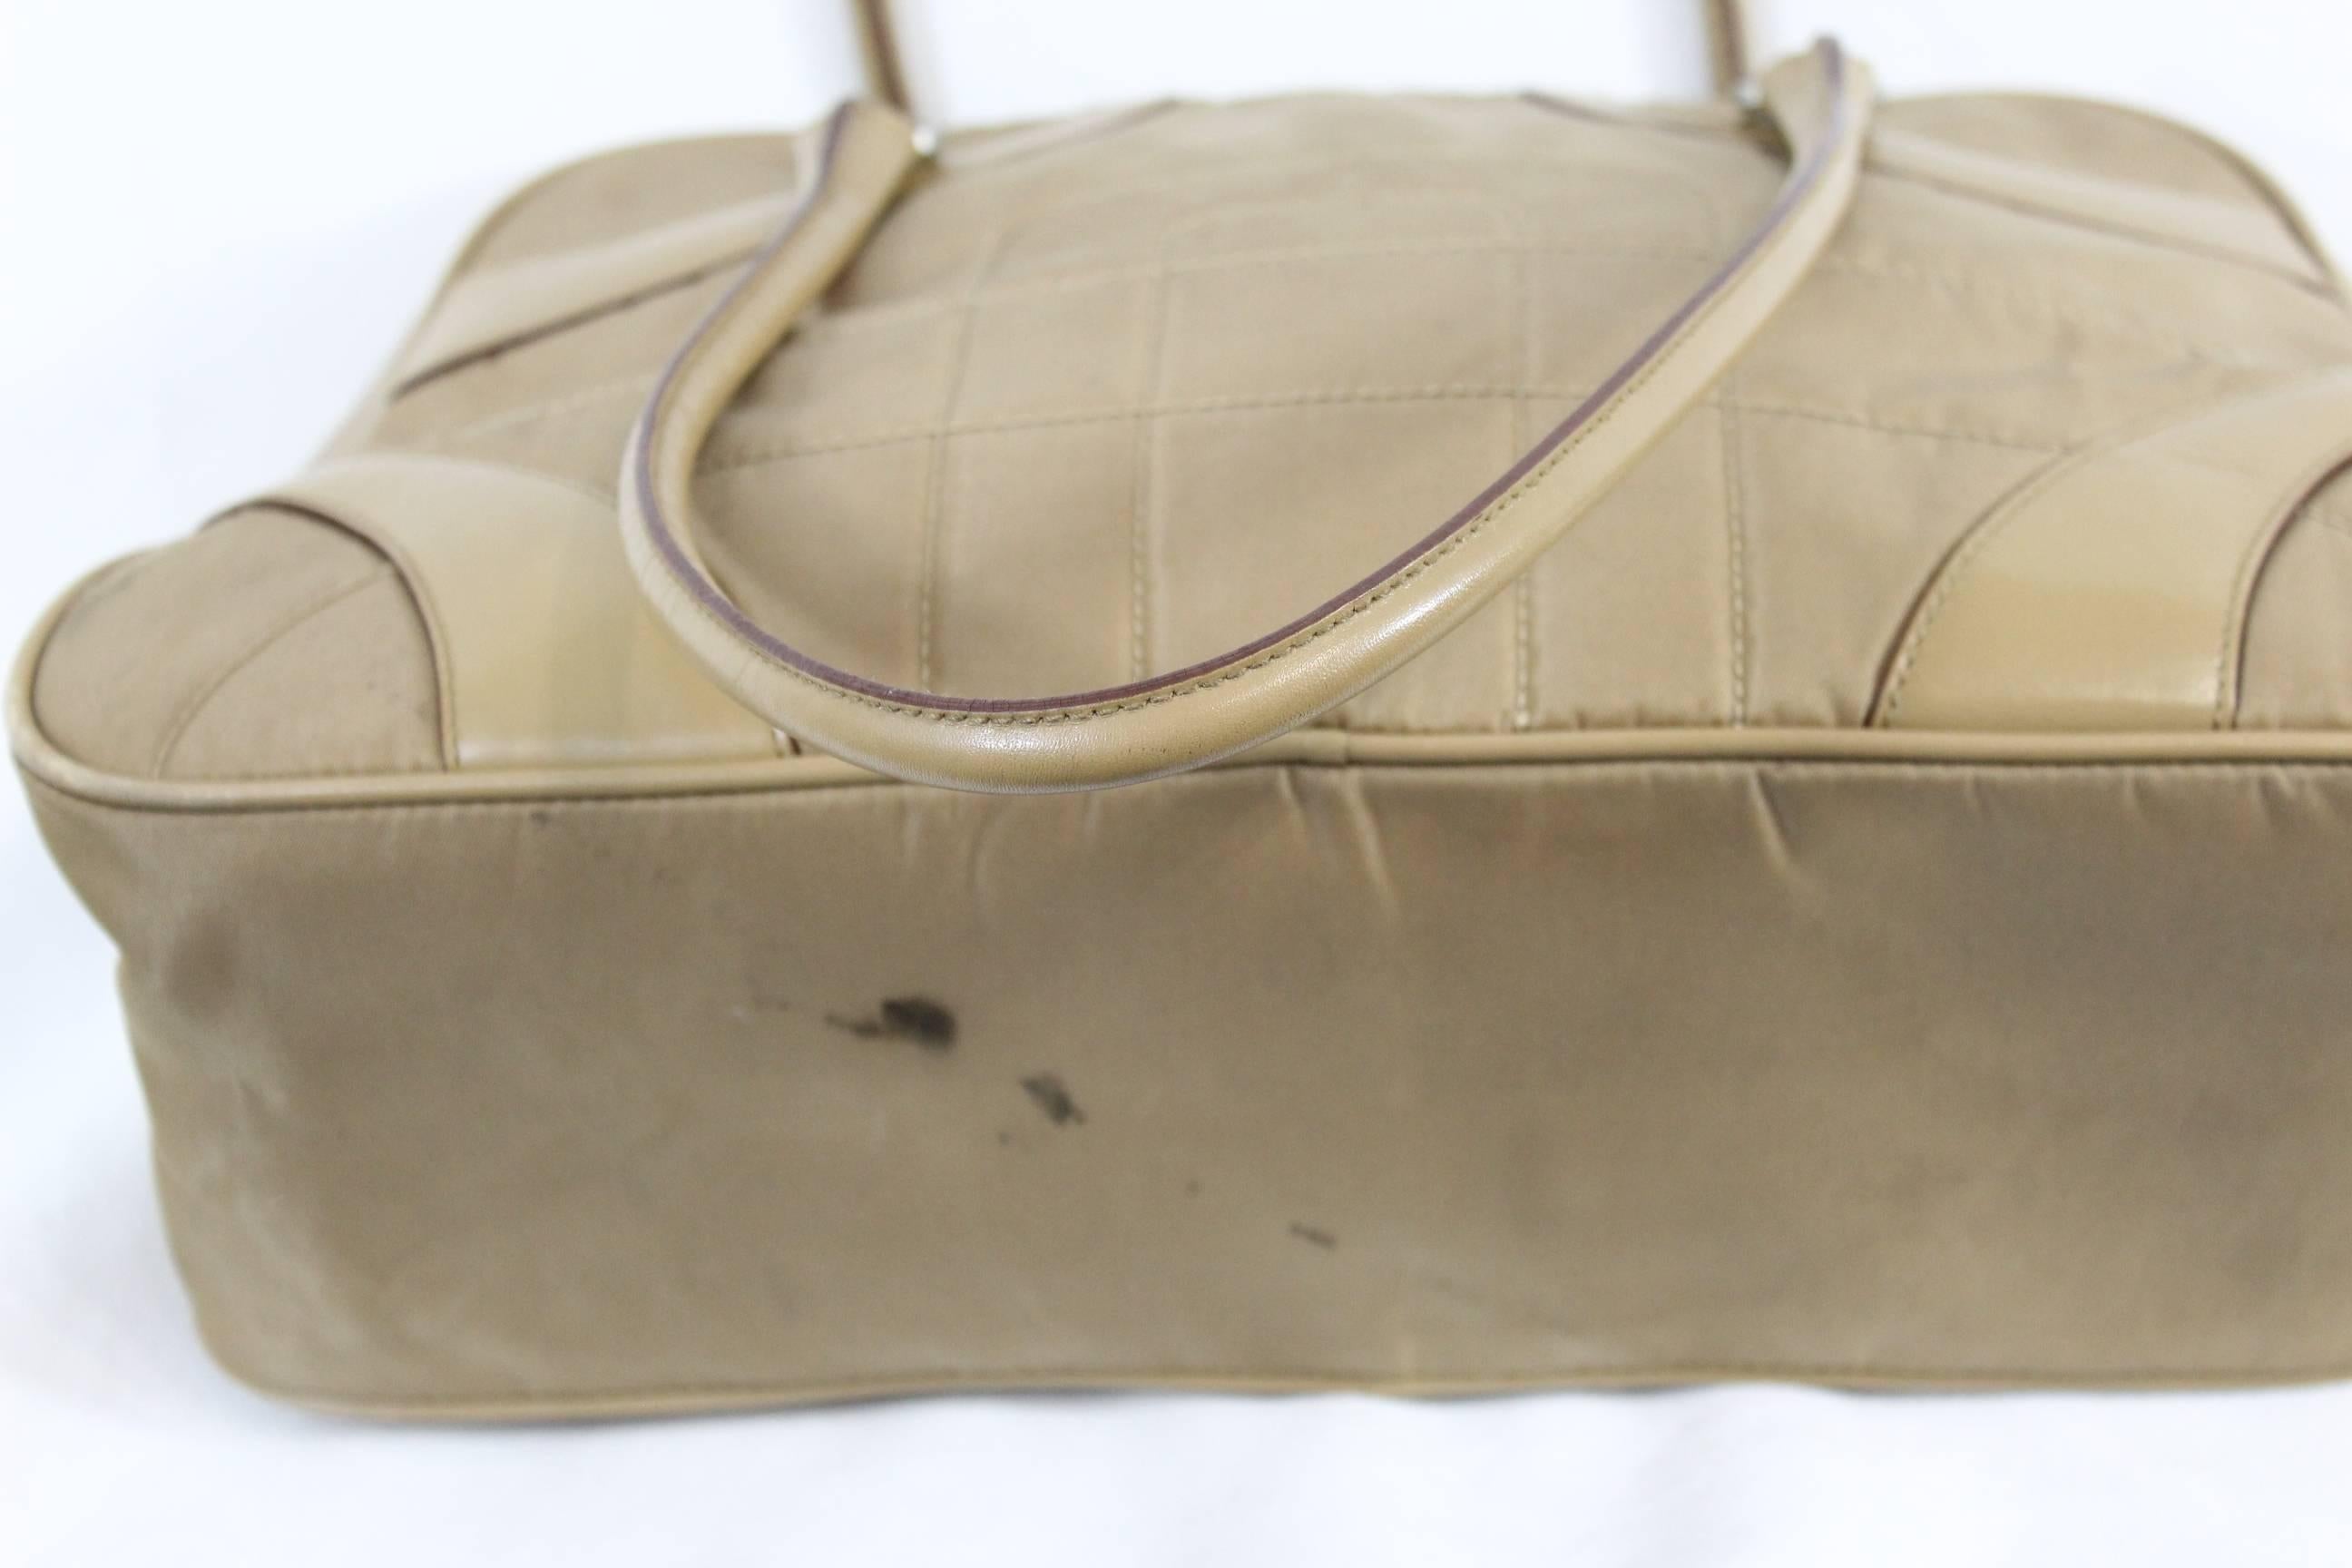 Nice Vintage Prada Nylon and leather Handbag.

Good conditon but 2 stains in the bottom of the bag. Front and back of the bag in quite good condition.

Size 13x8